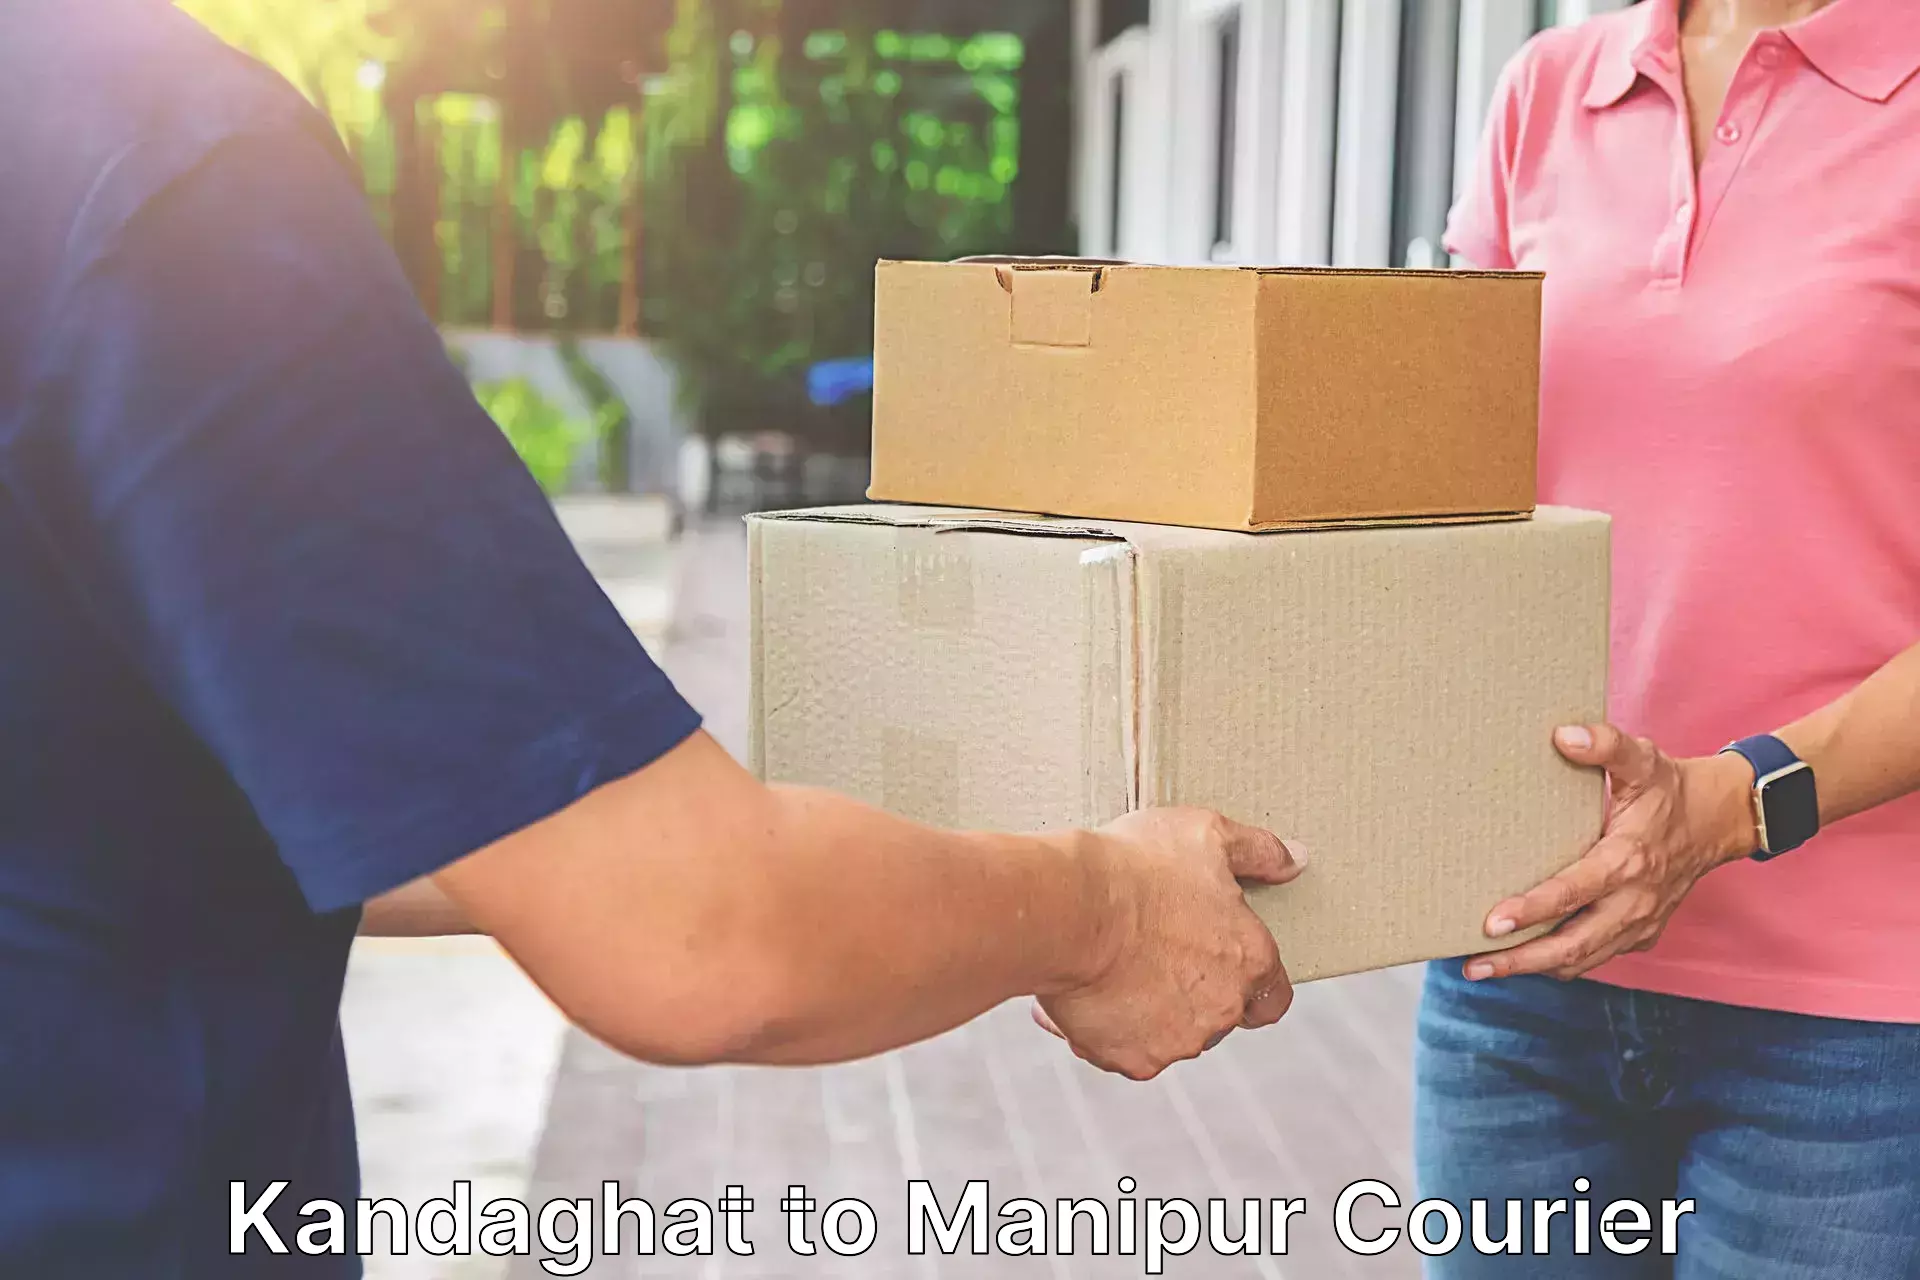 Quick dispatch service Kandaghat to Manipur